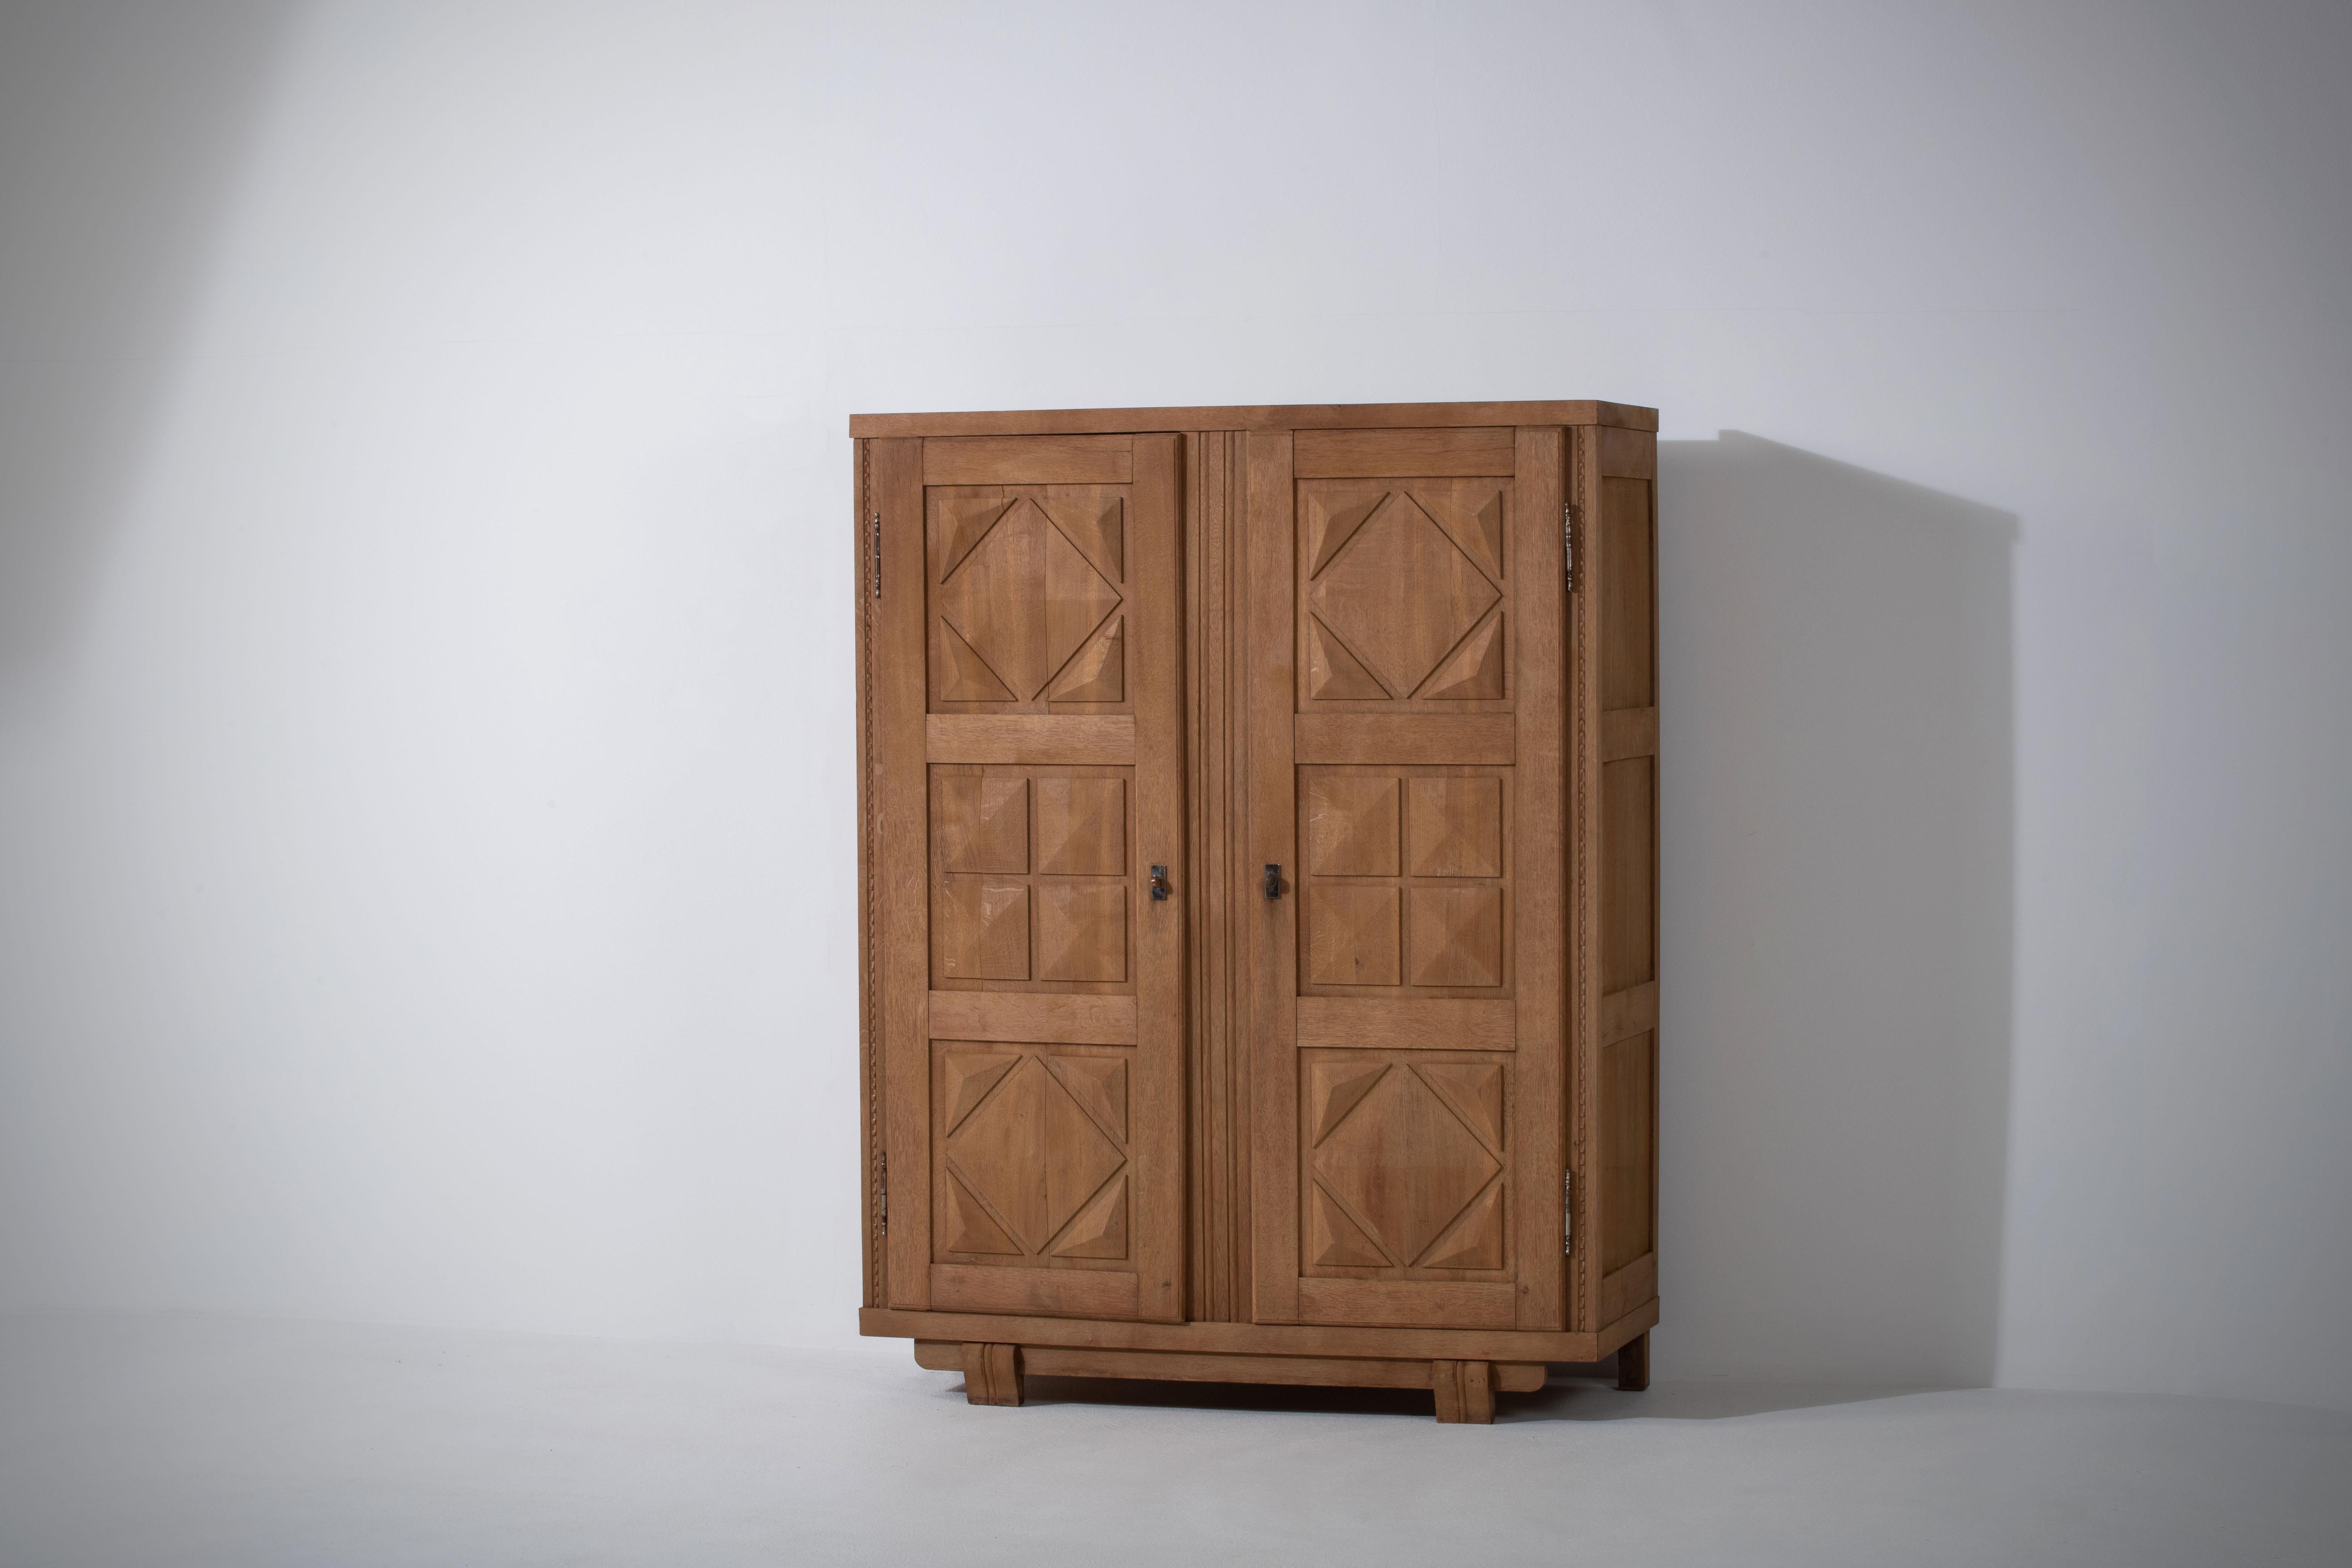 Beautiful oak vintage wardrobe made in the 1960s. It has a double opening doors to shelve space with geometrical patterned doors. A great vintage piece in good condition which would bring a huge touch of style to any bedroom.